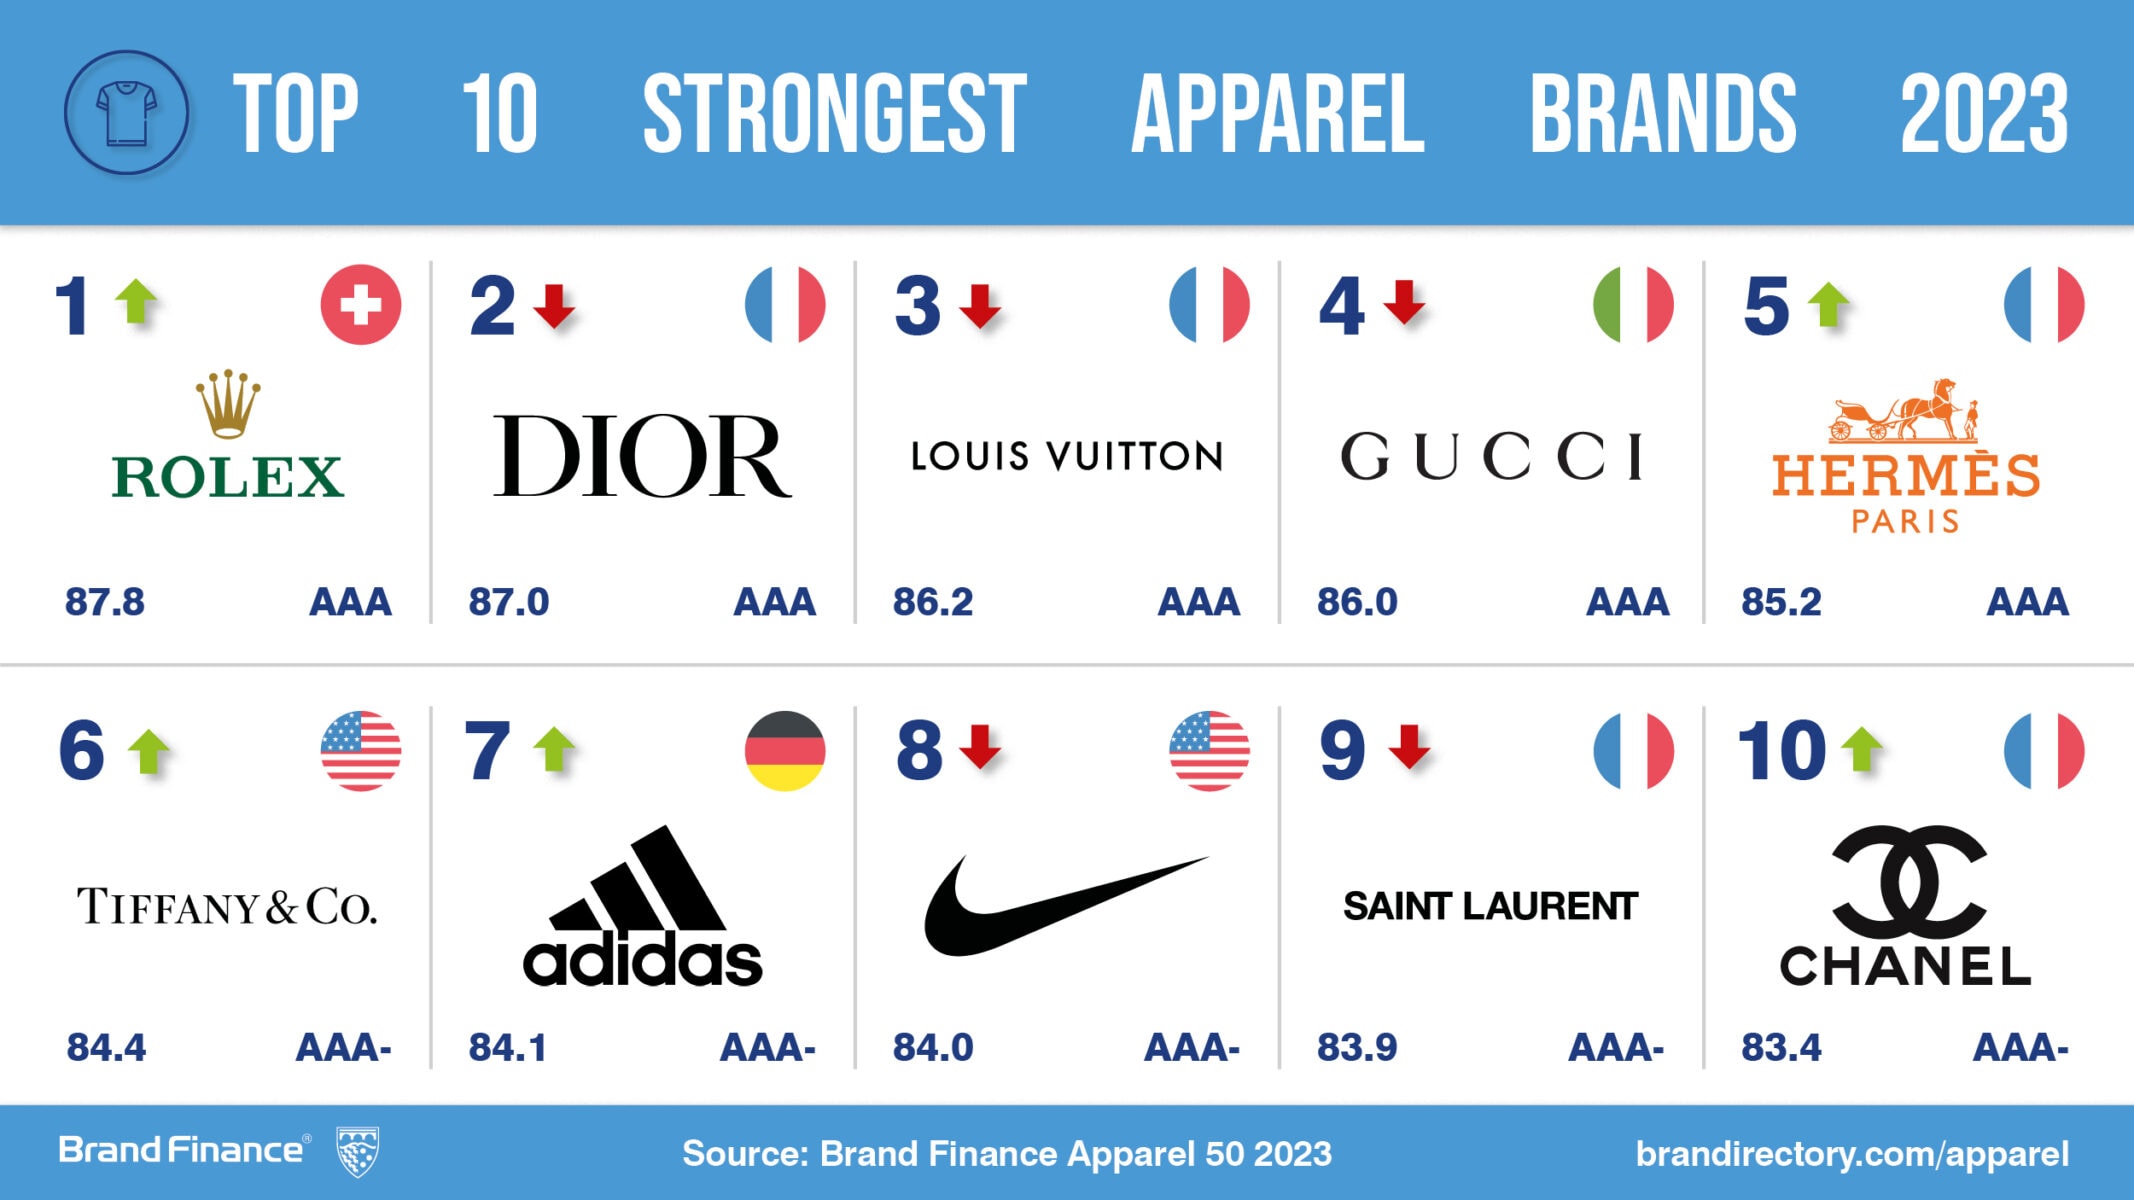 Nike maintains its leadership as the world's most valuable apparel